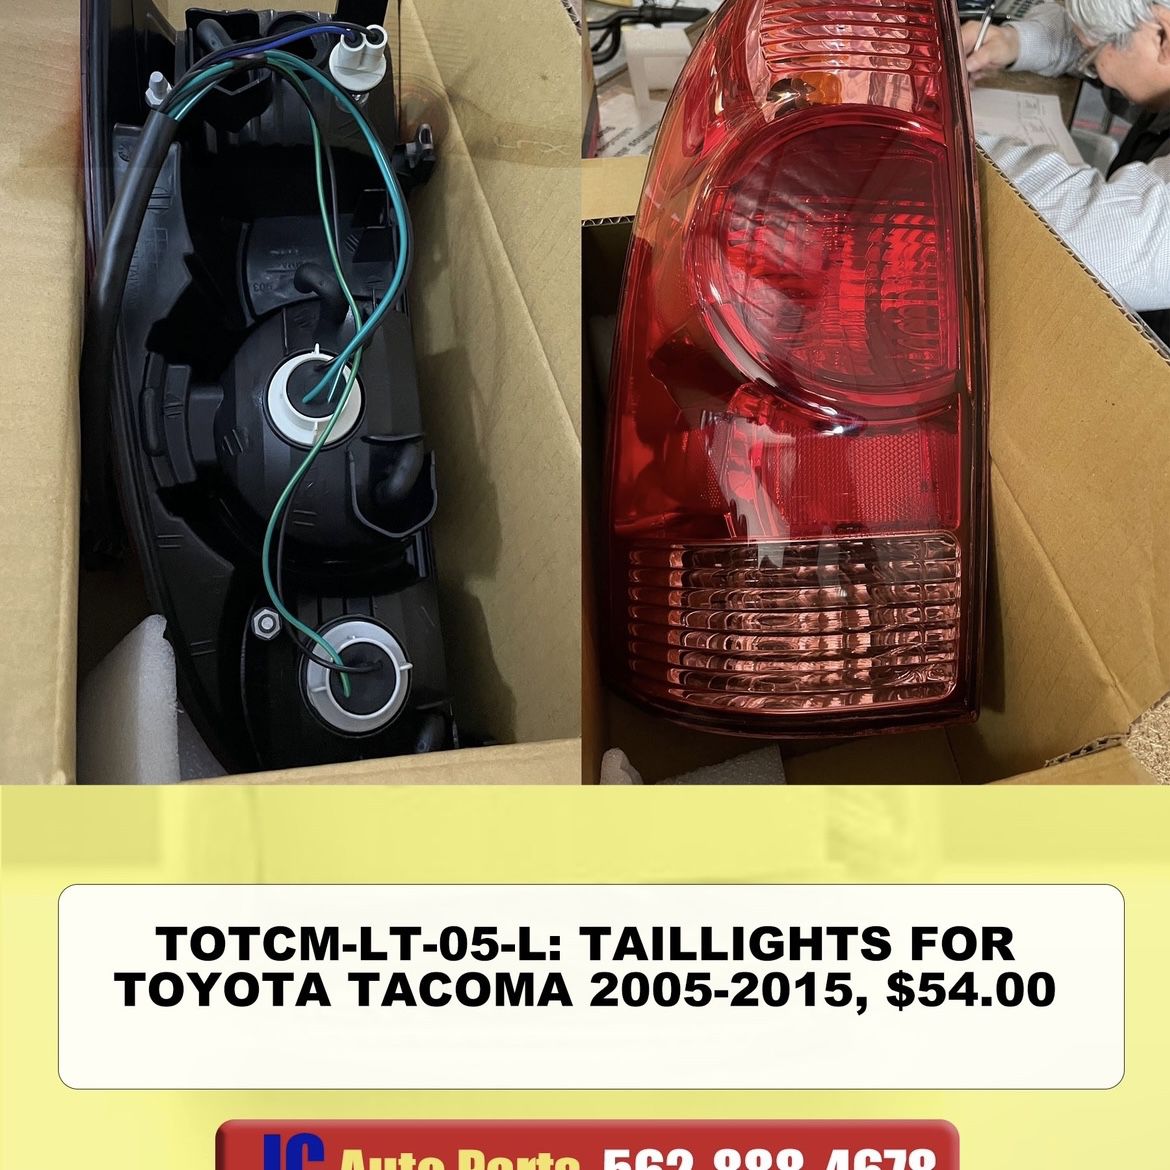 Taillights For Toyota Tacoma 2005 2006 2007 2008 2009 2010 2011 2012 2013 2014 2015